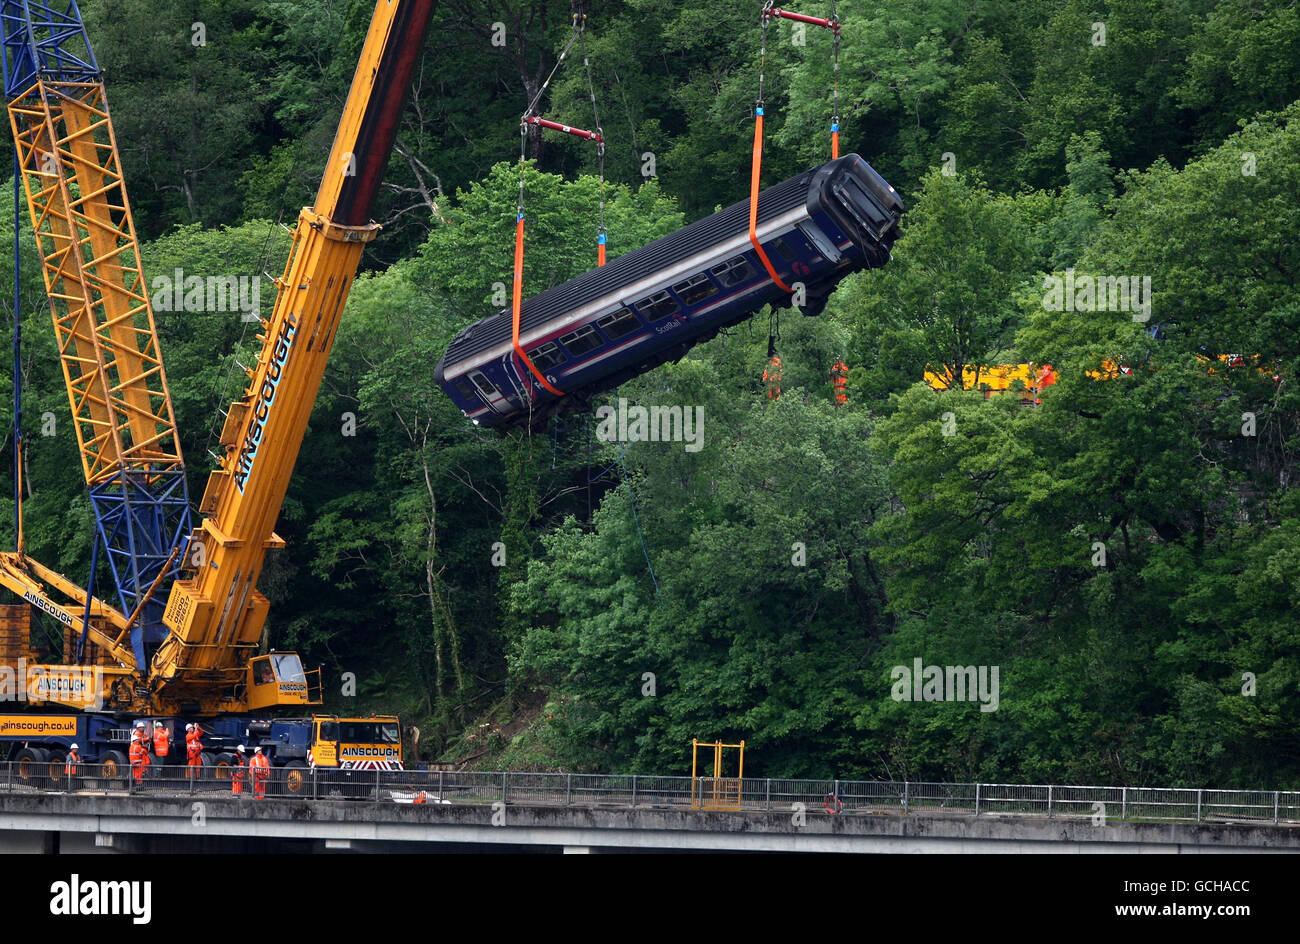 A carriage from the Scotrail train being removed from the banking near Cruachan Power station following the derailment on Monday night. Stock Photo